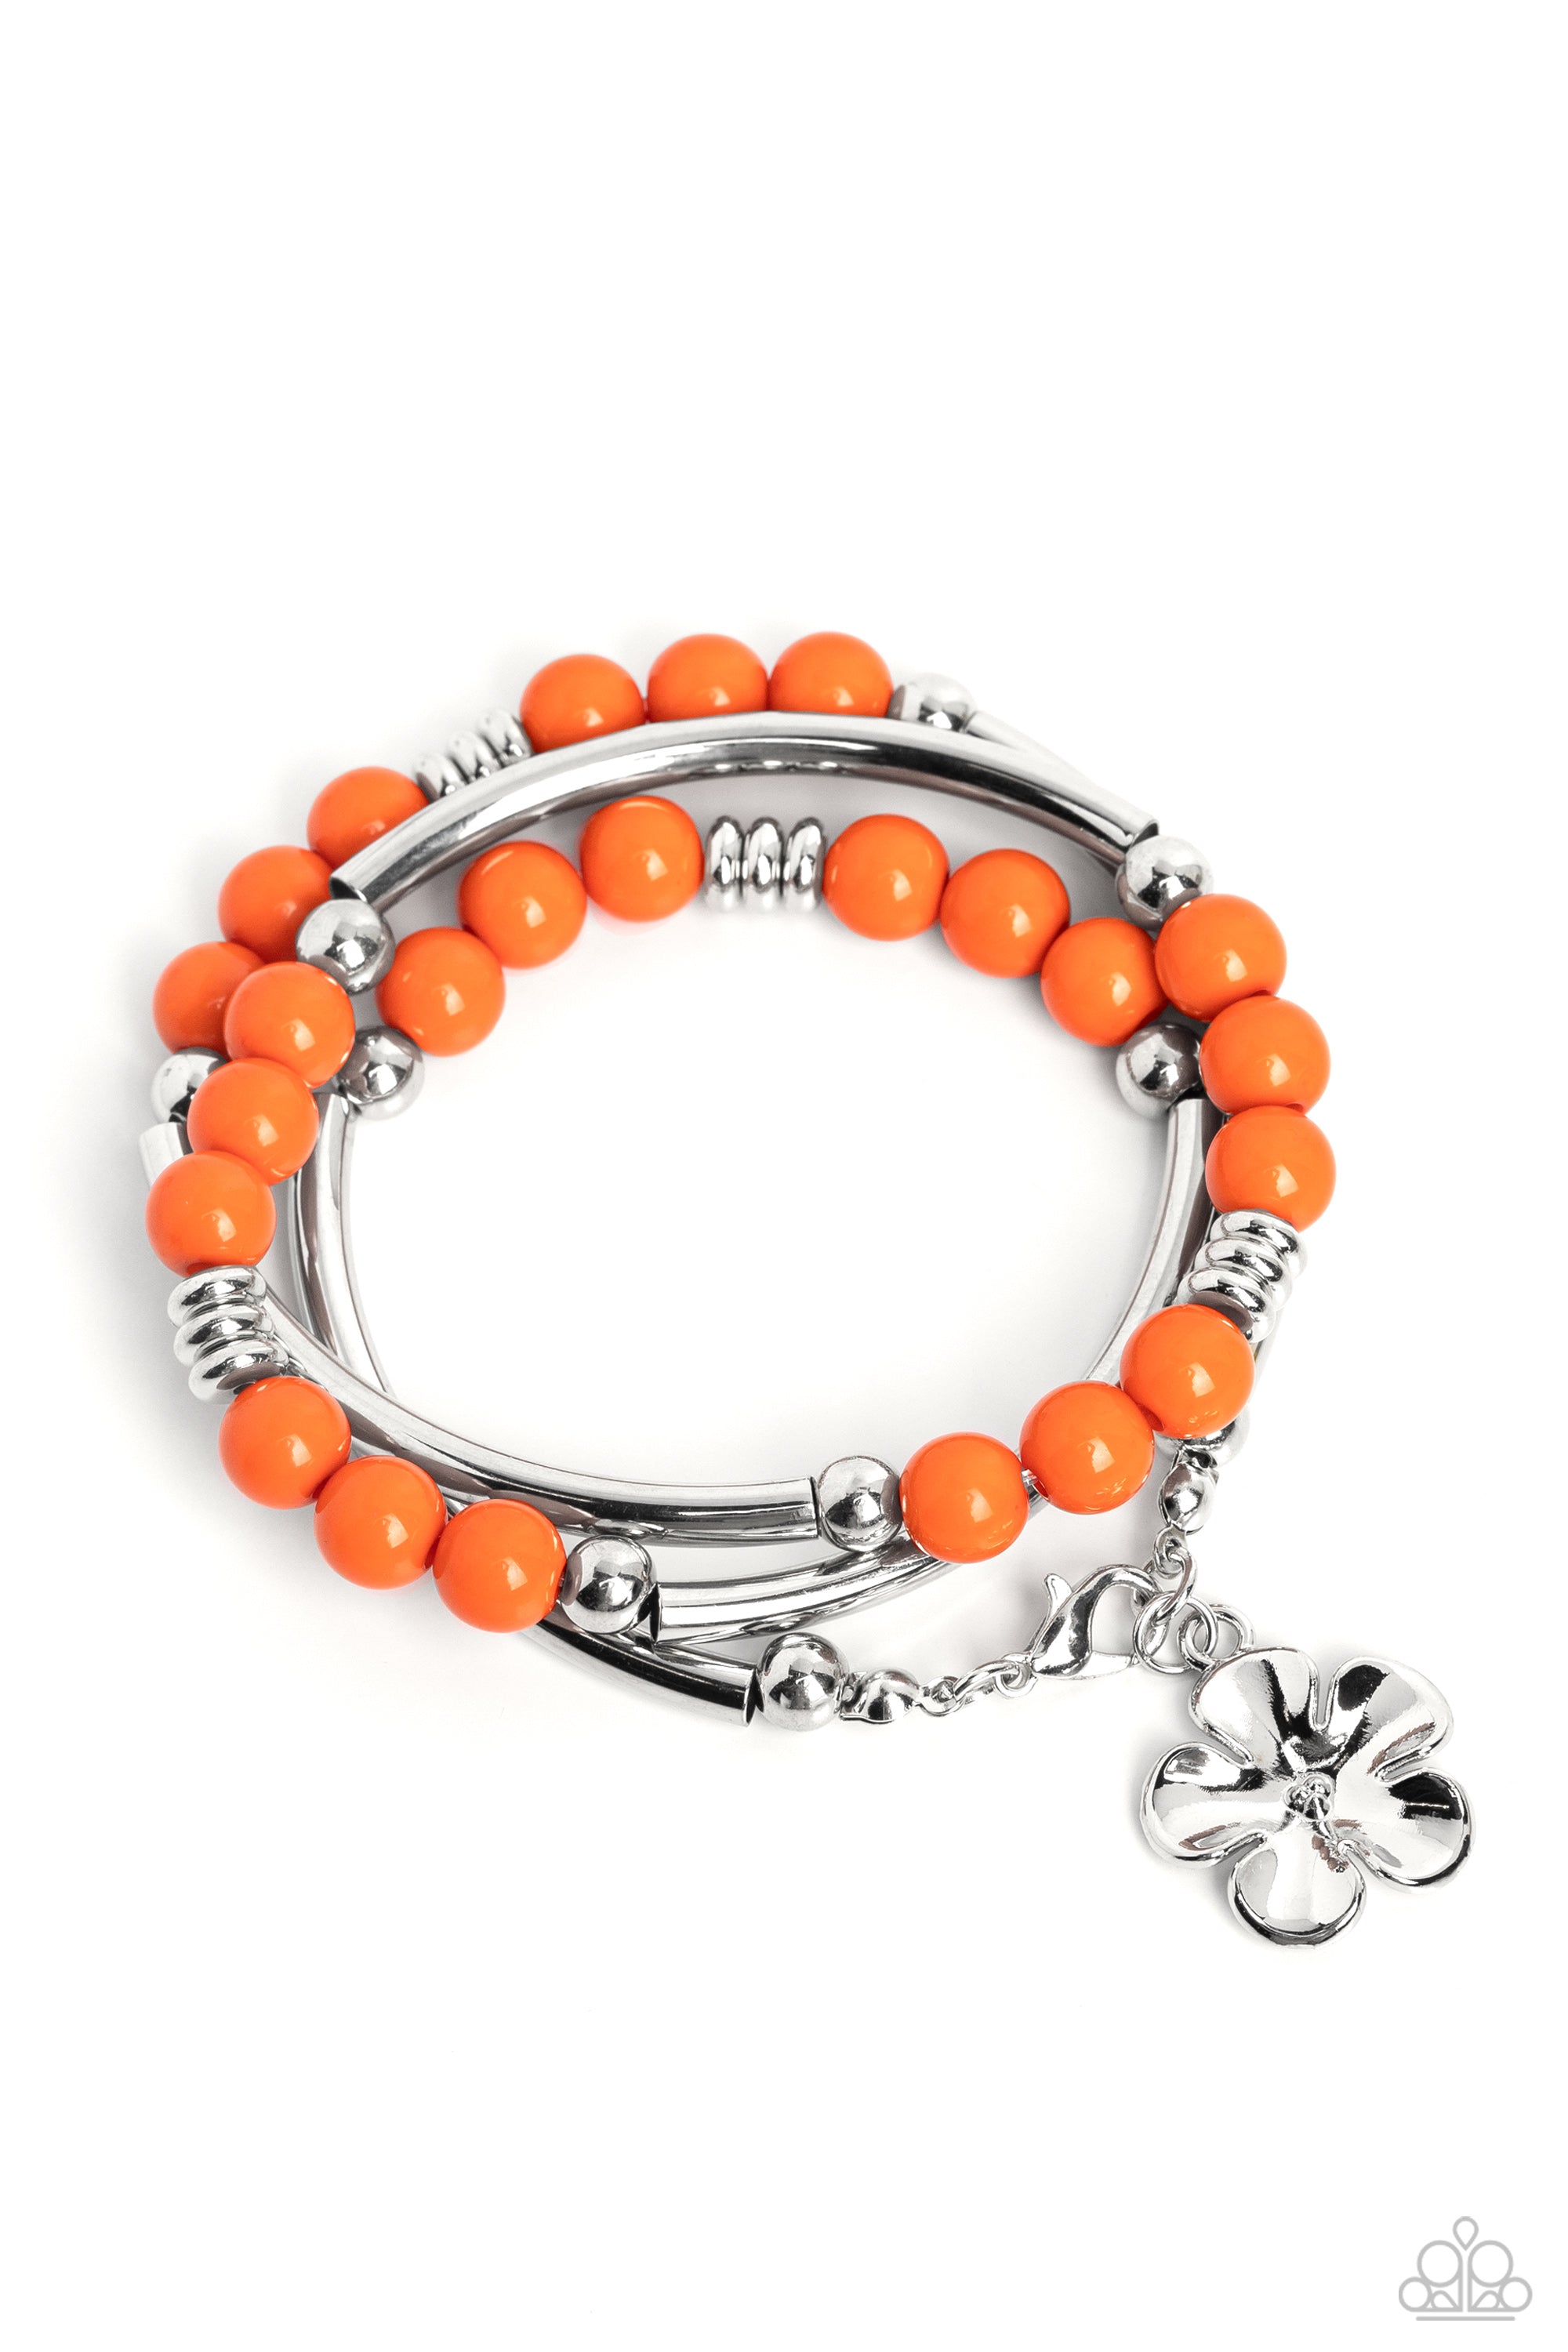 Off the WRAP Orange Floral Coil Bracelet - Paparazzi Accessories- lightbox - CarasShop.com - $5 Jewelry by Cara Jewels